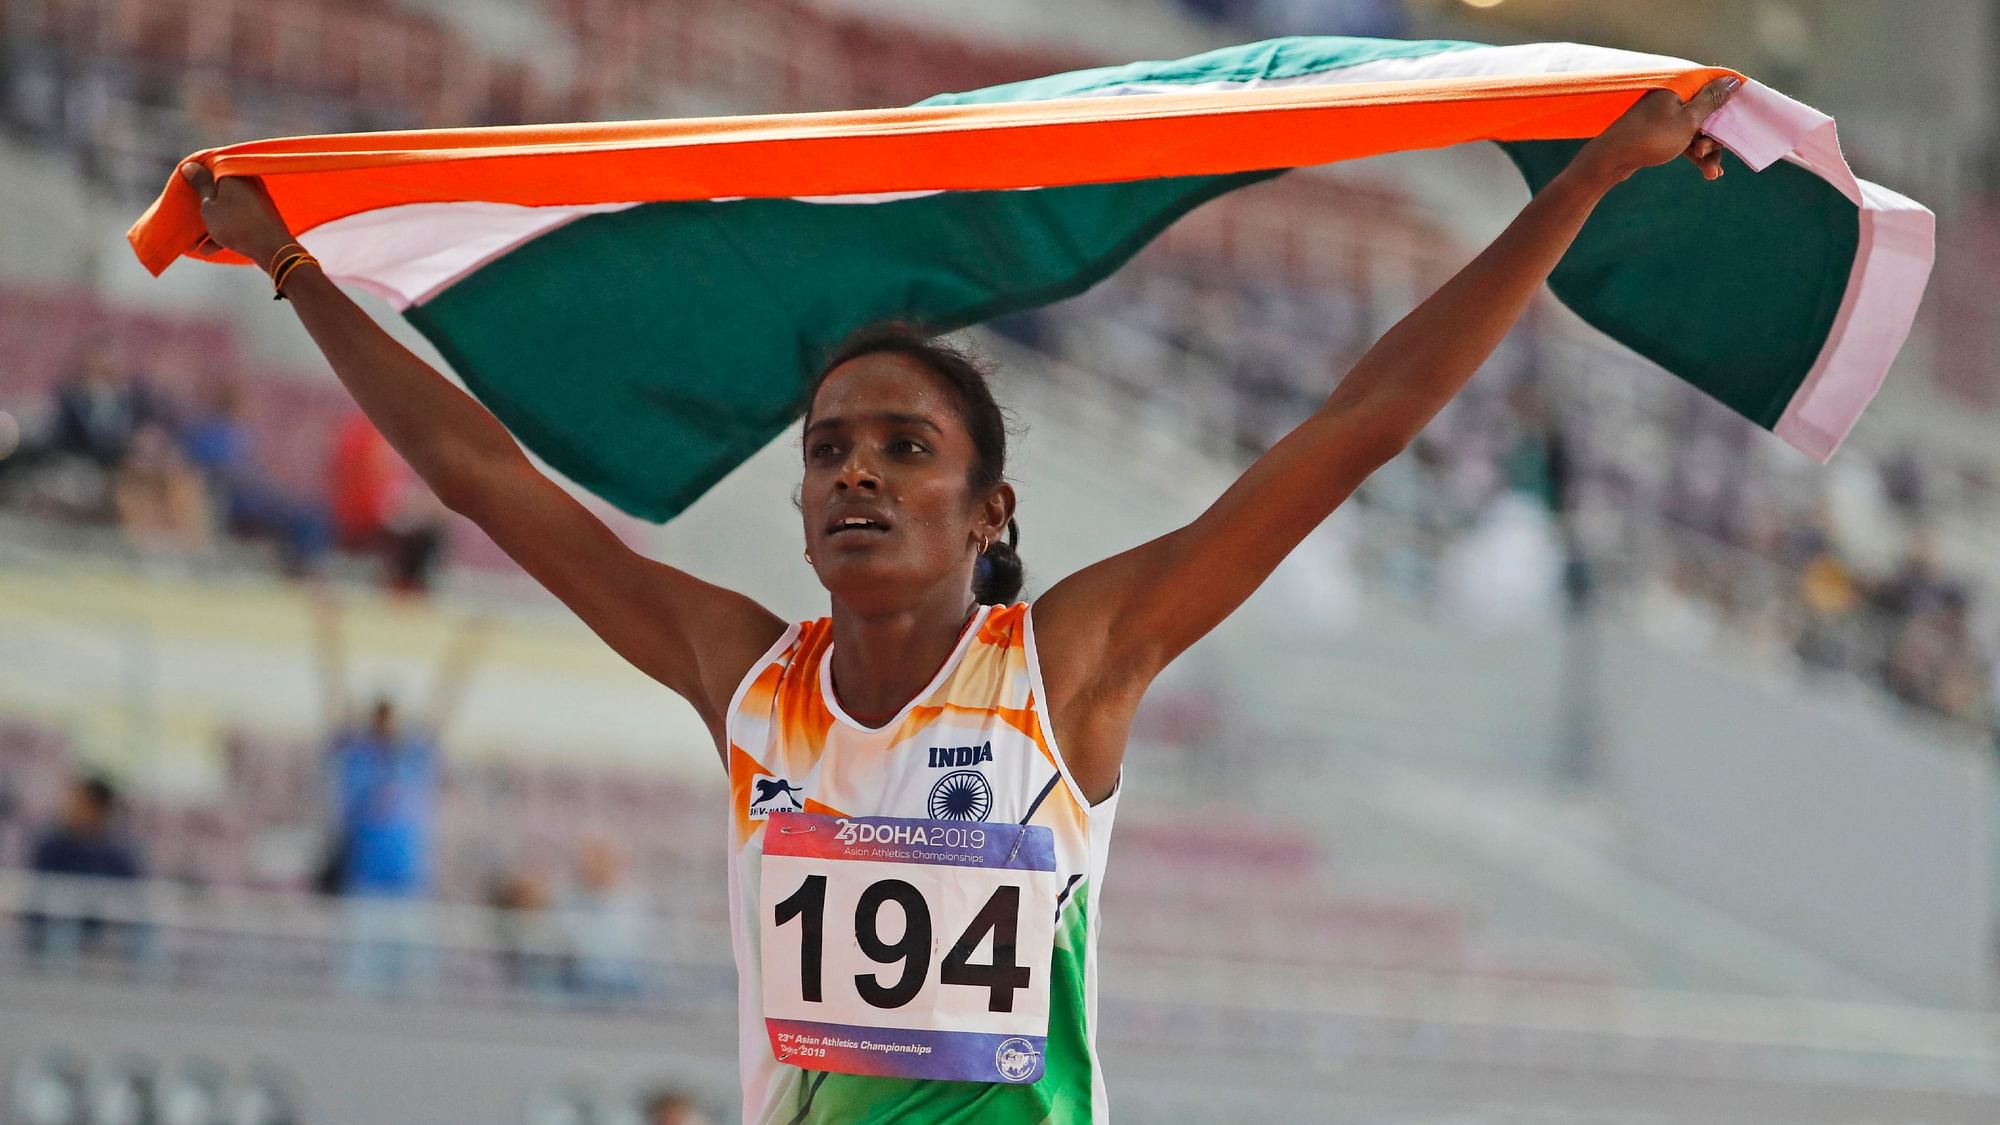 Gomathi Marimuthu celebrates after winning gold in the women’s 800-meters final race at the Asian Athletics Championships in Doha.